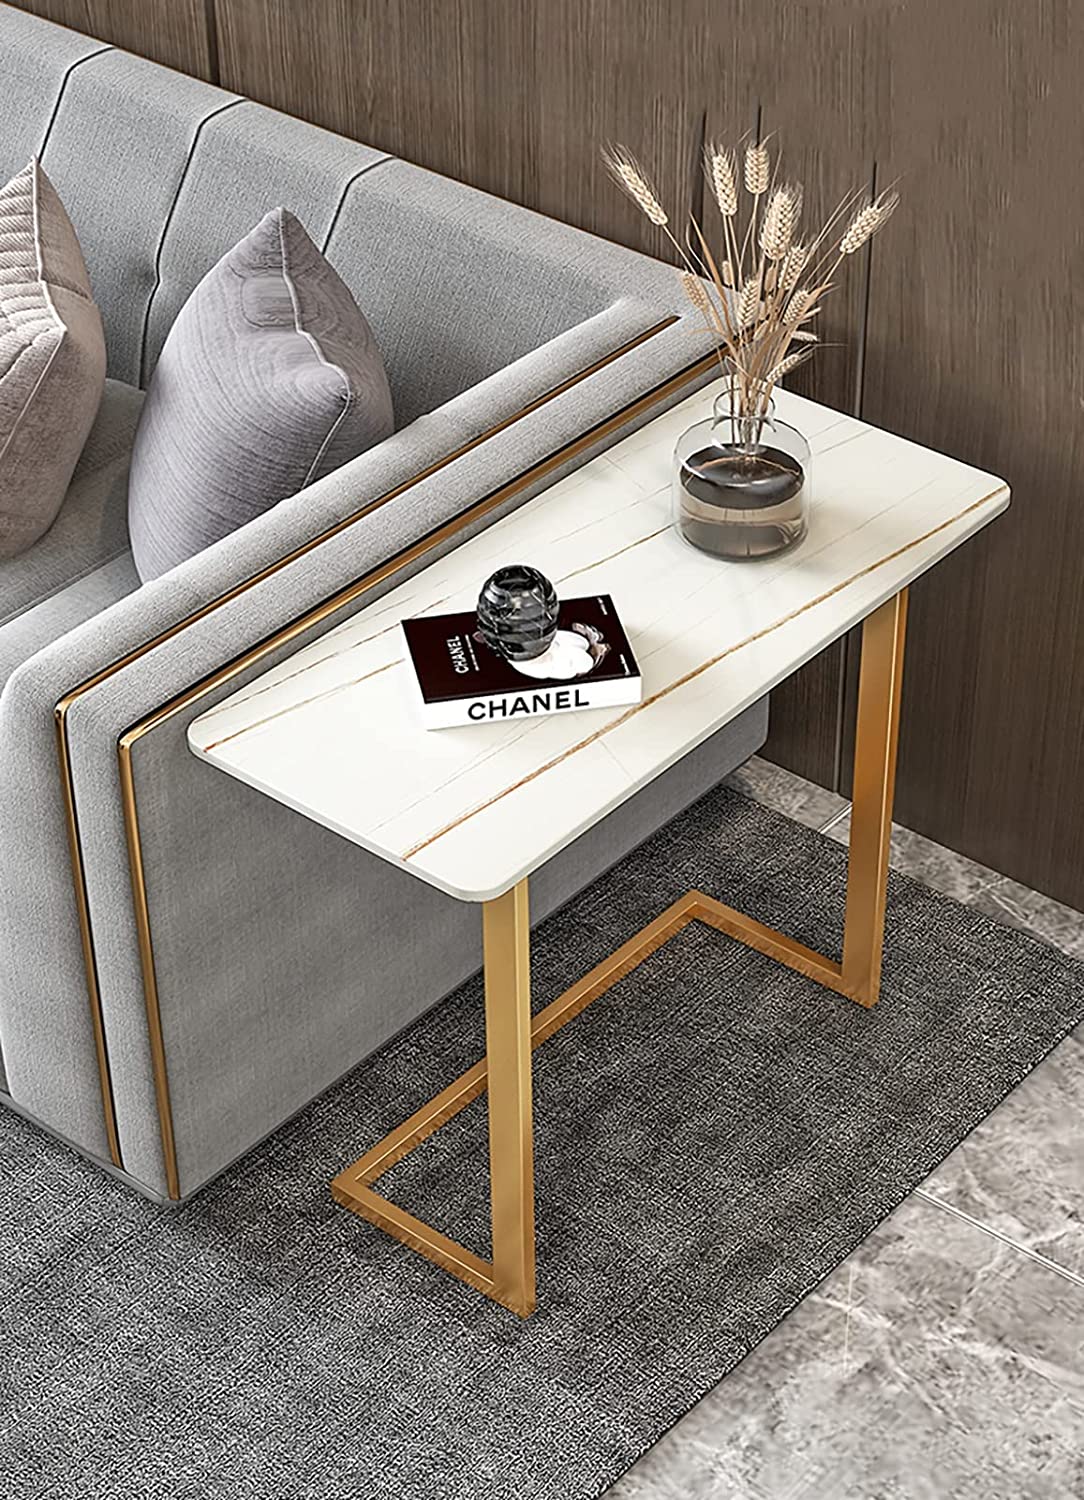 Console Tables | Sofa Side Console Table in UAE